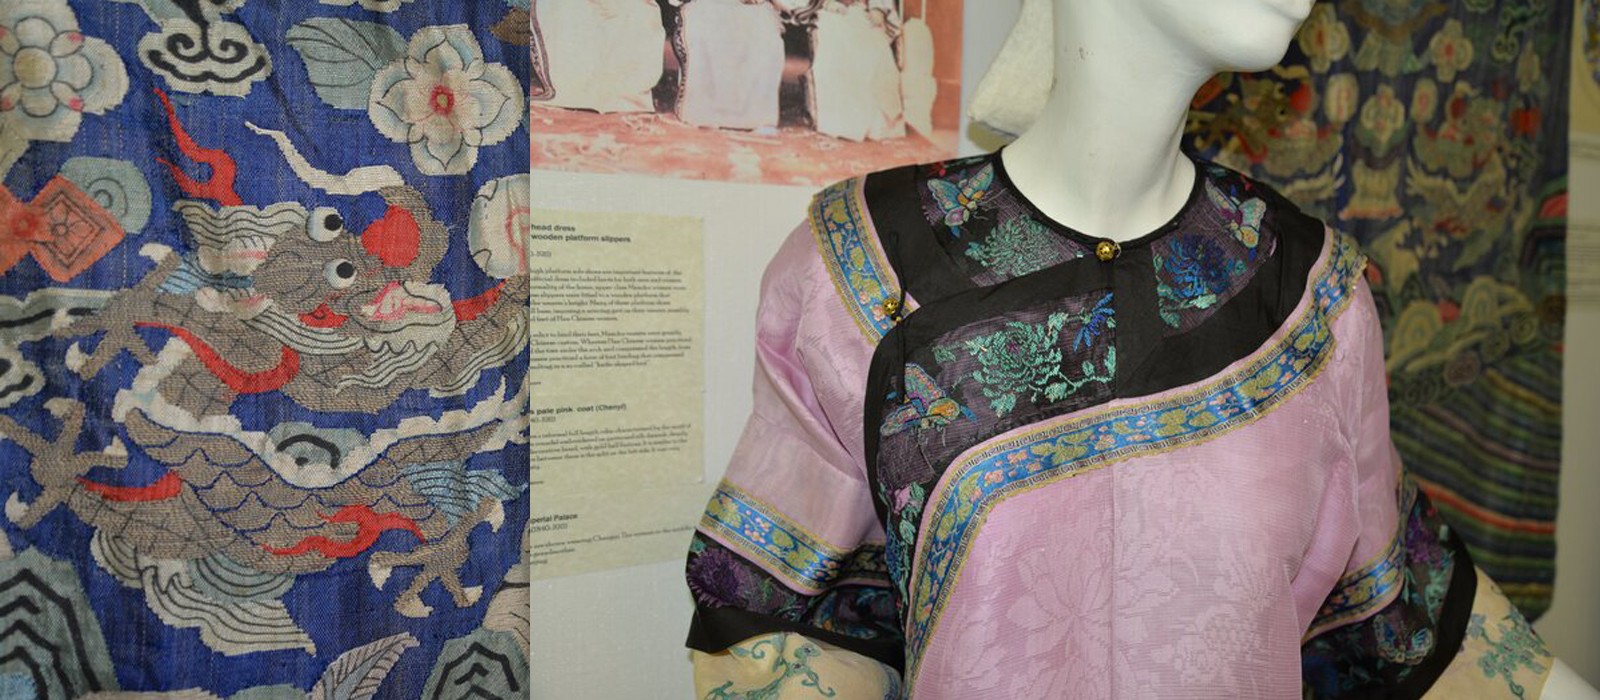 Insert image for Chinese Traditional Dress Exhibition